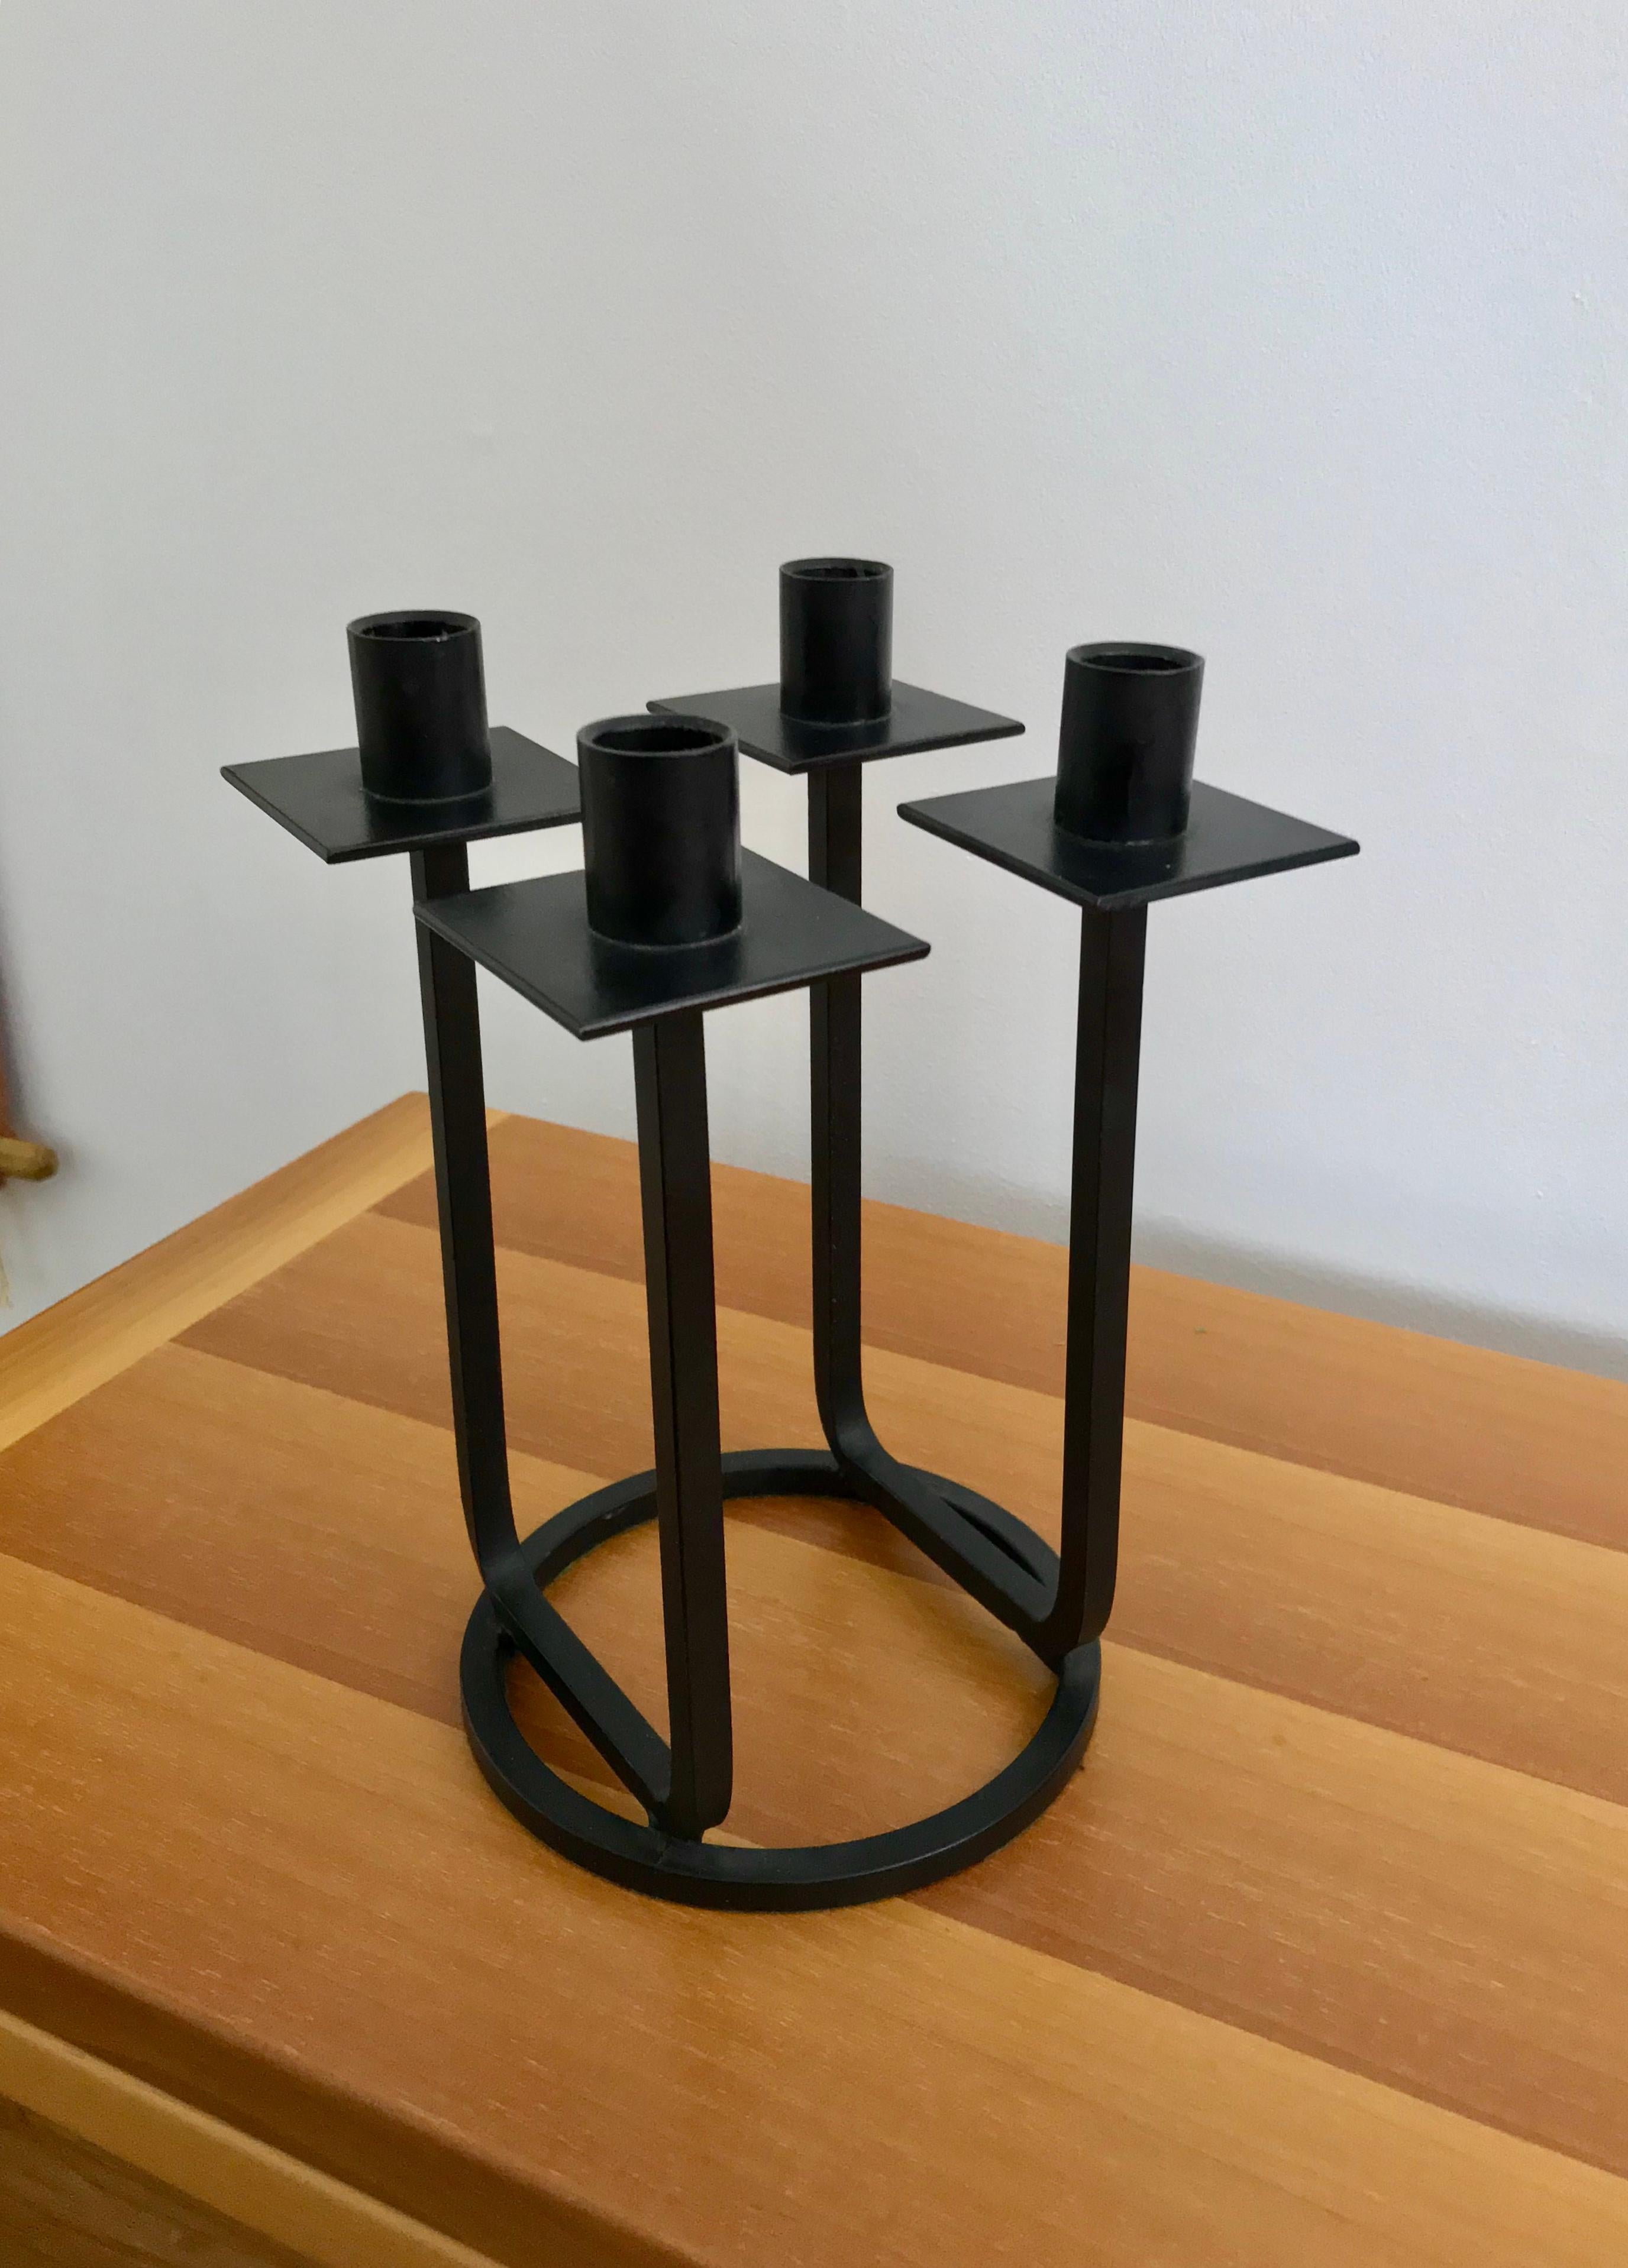 American Rare Vintage Black Iron Midcentury Candlestick by Van Keppel Green For Sale